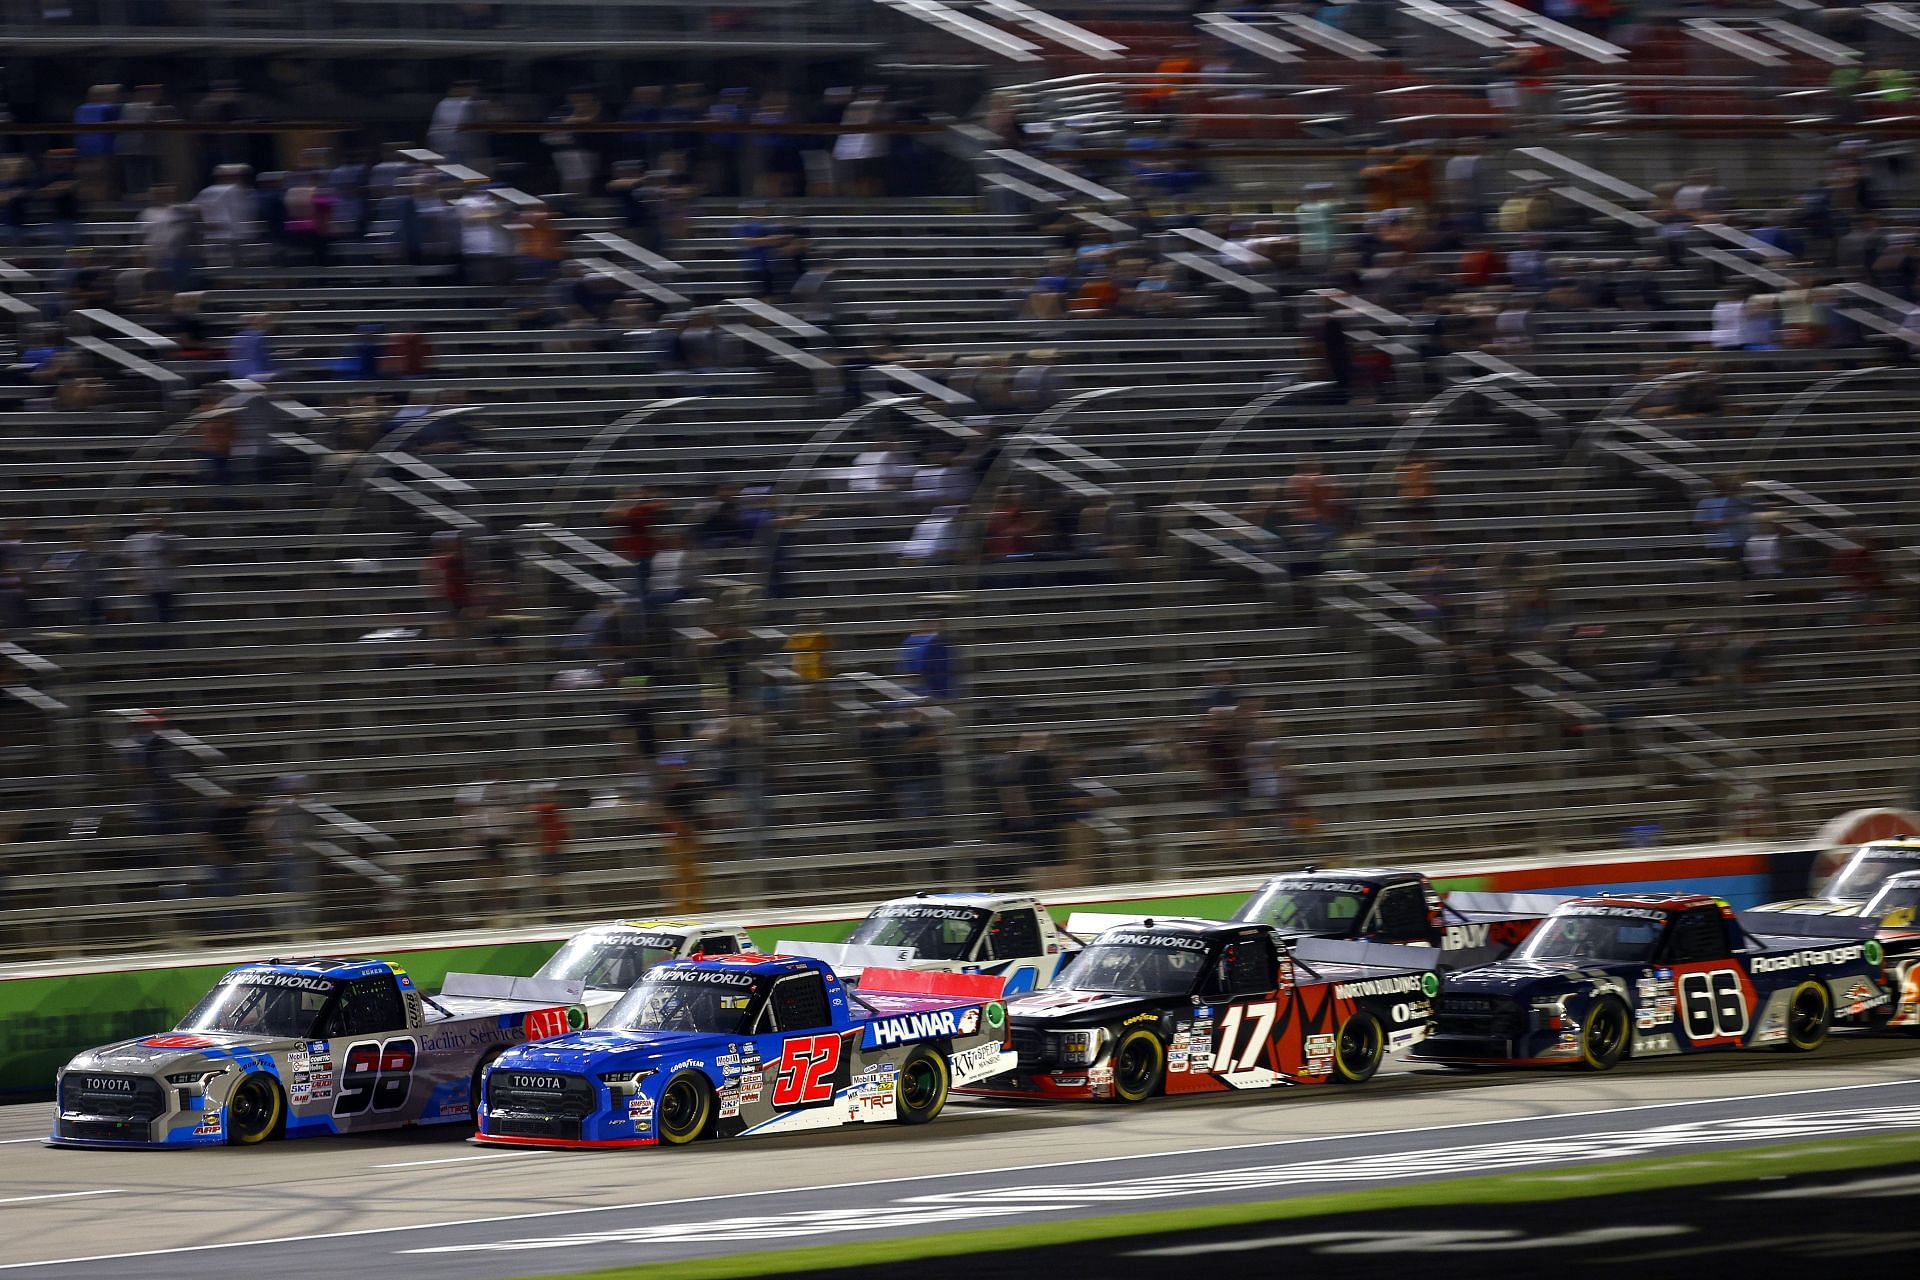 NASCAR Truck Series race will not have a live pit stop